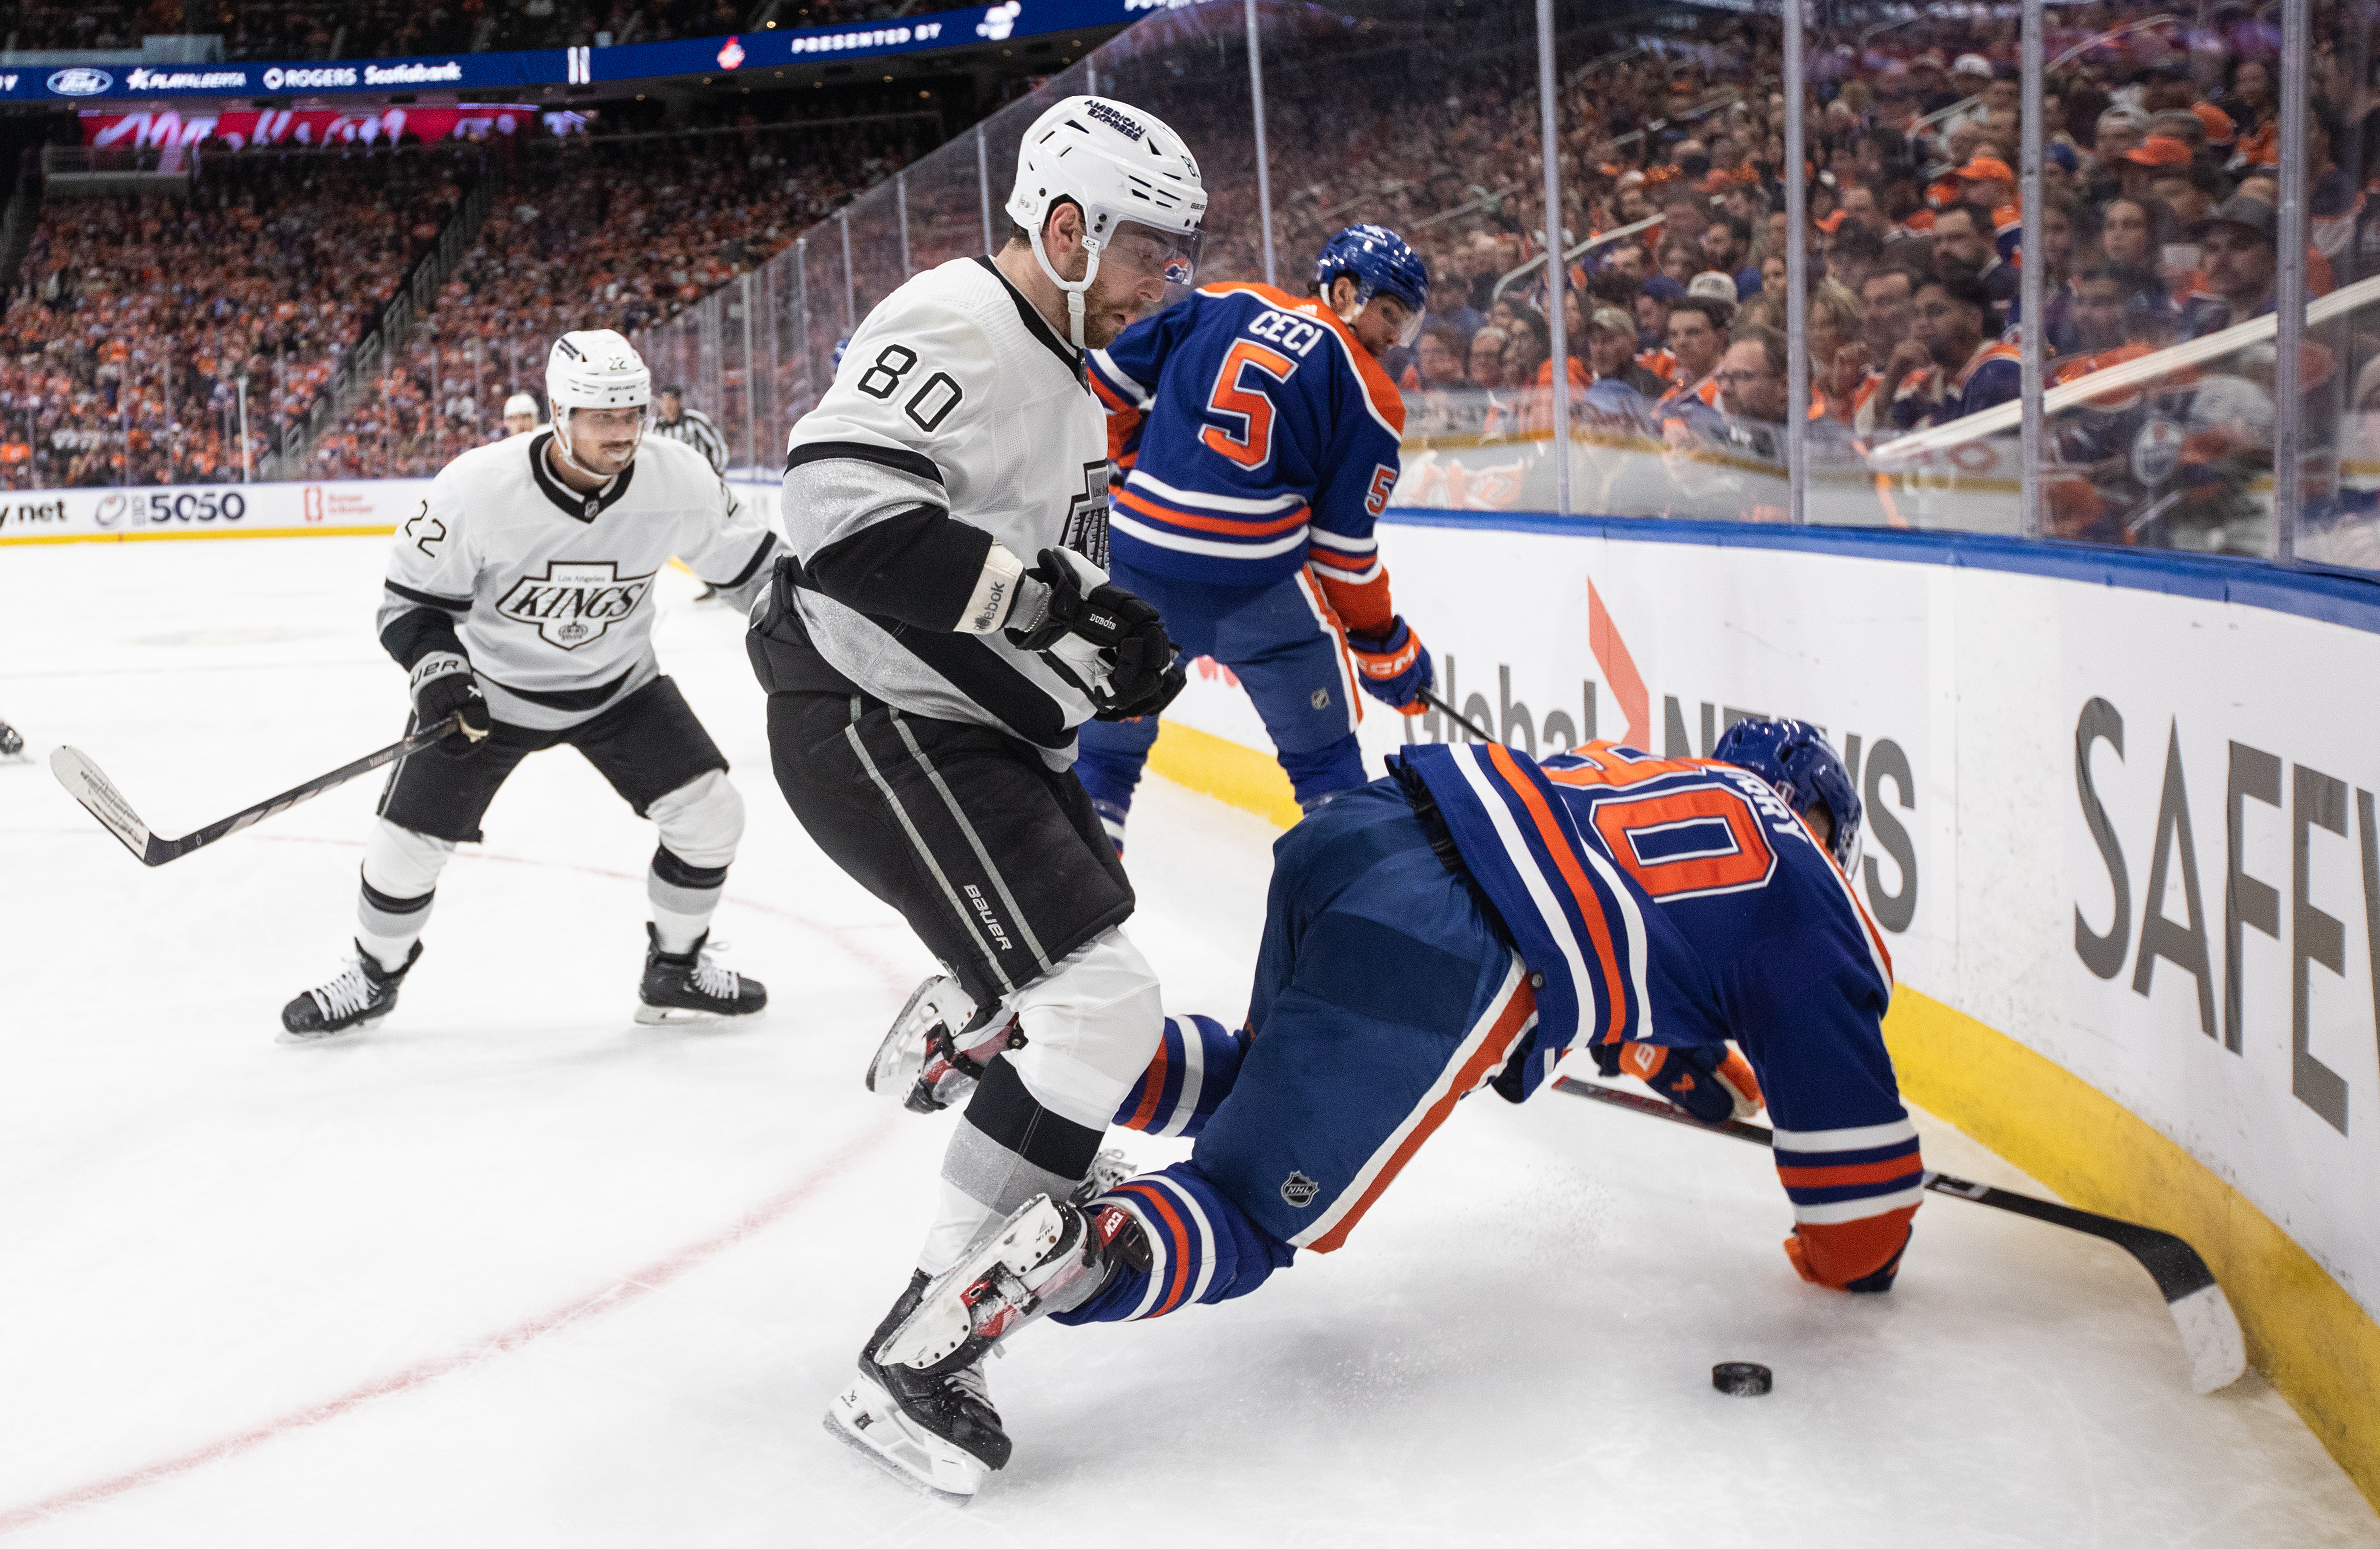 Edmonton Oilers lose Game 2 in overtime to Kings